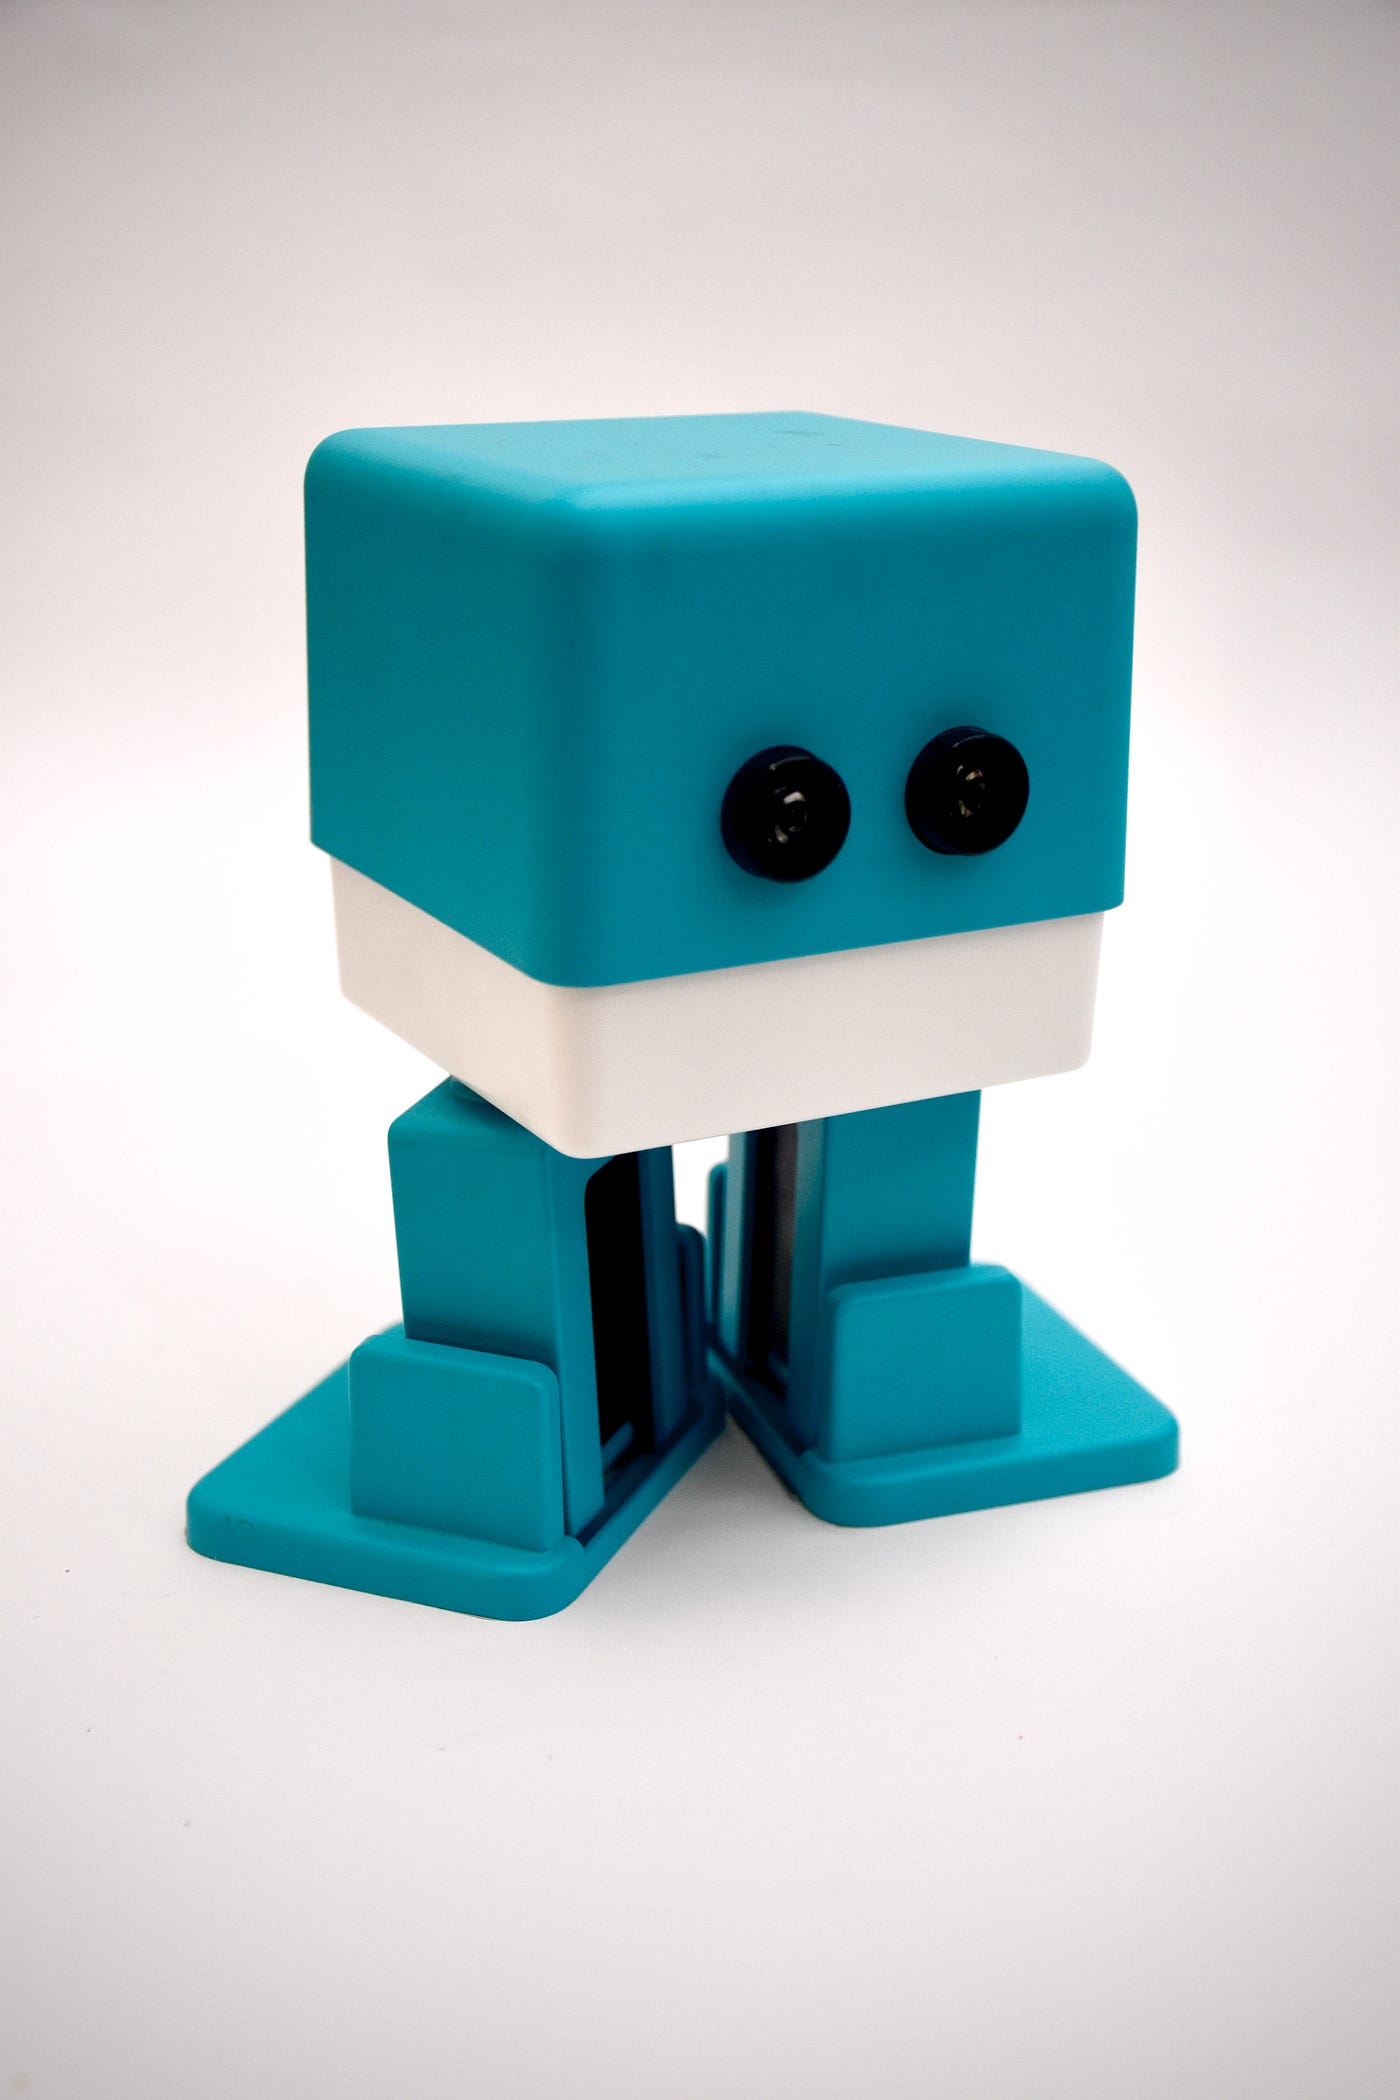 A picture pf a turquoise and white plastic bot with two black eyes against a black background.